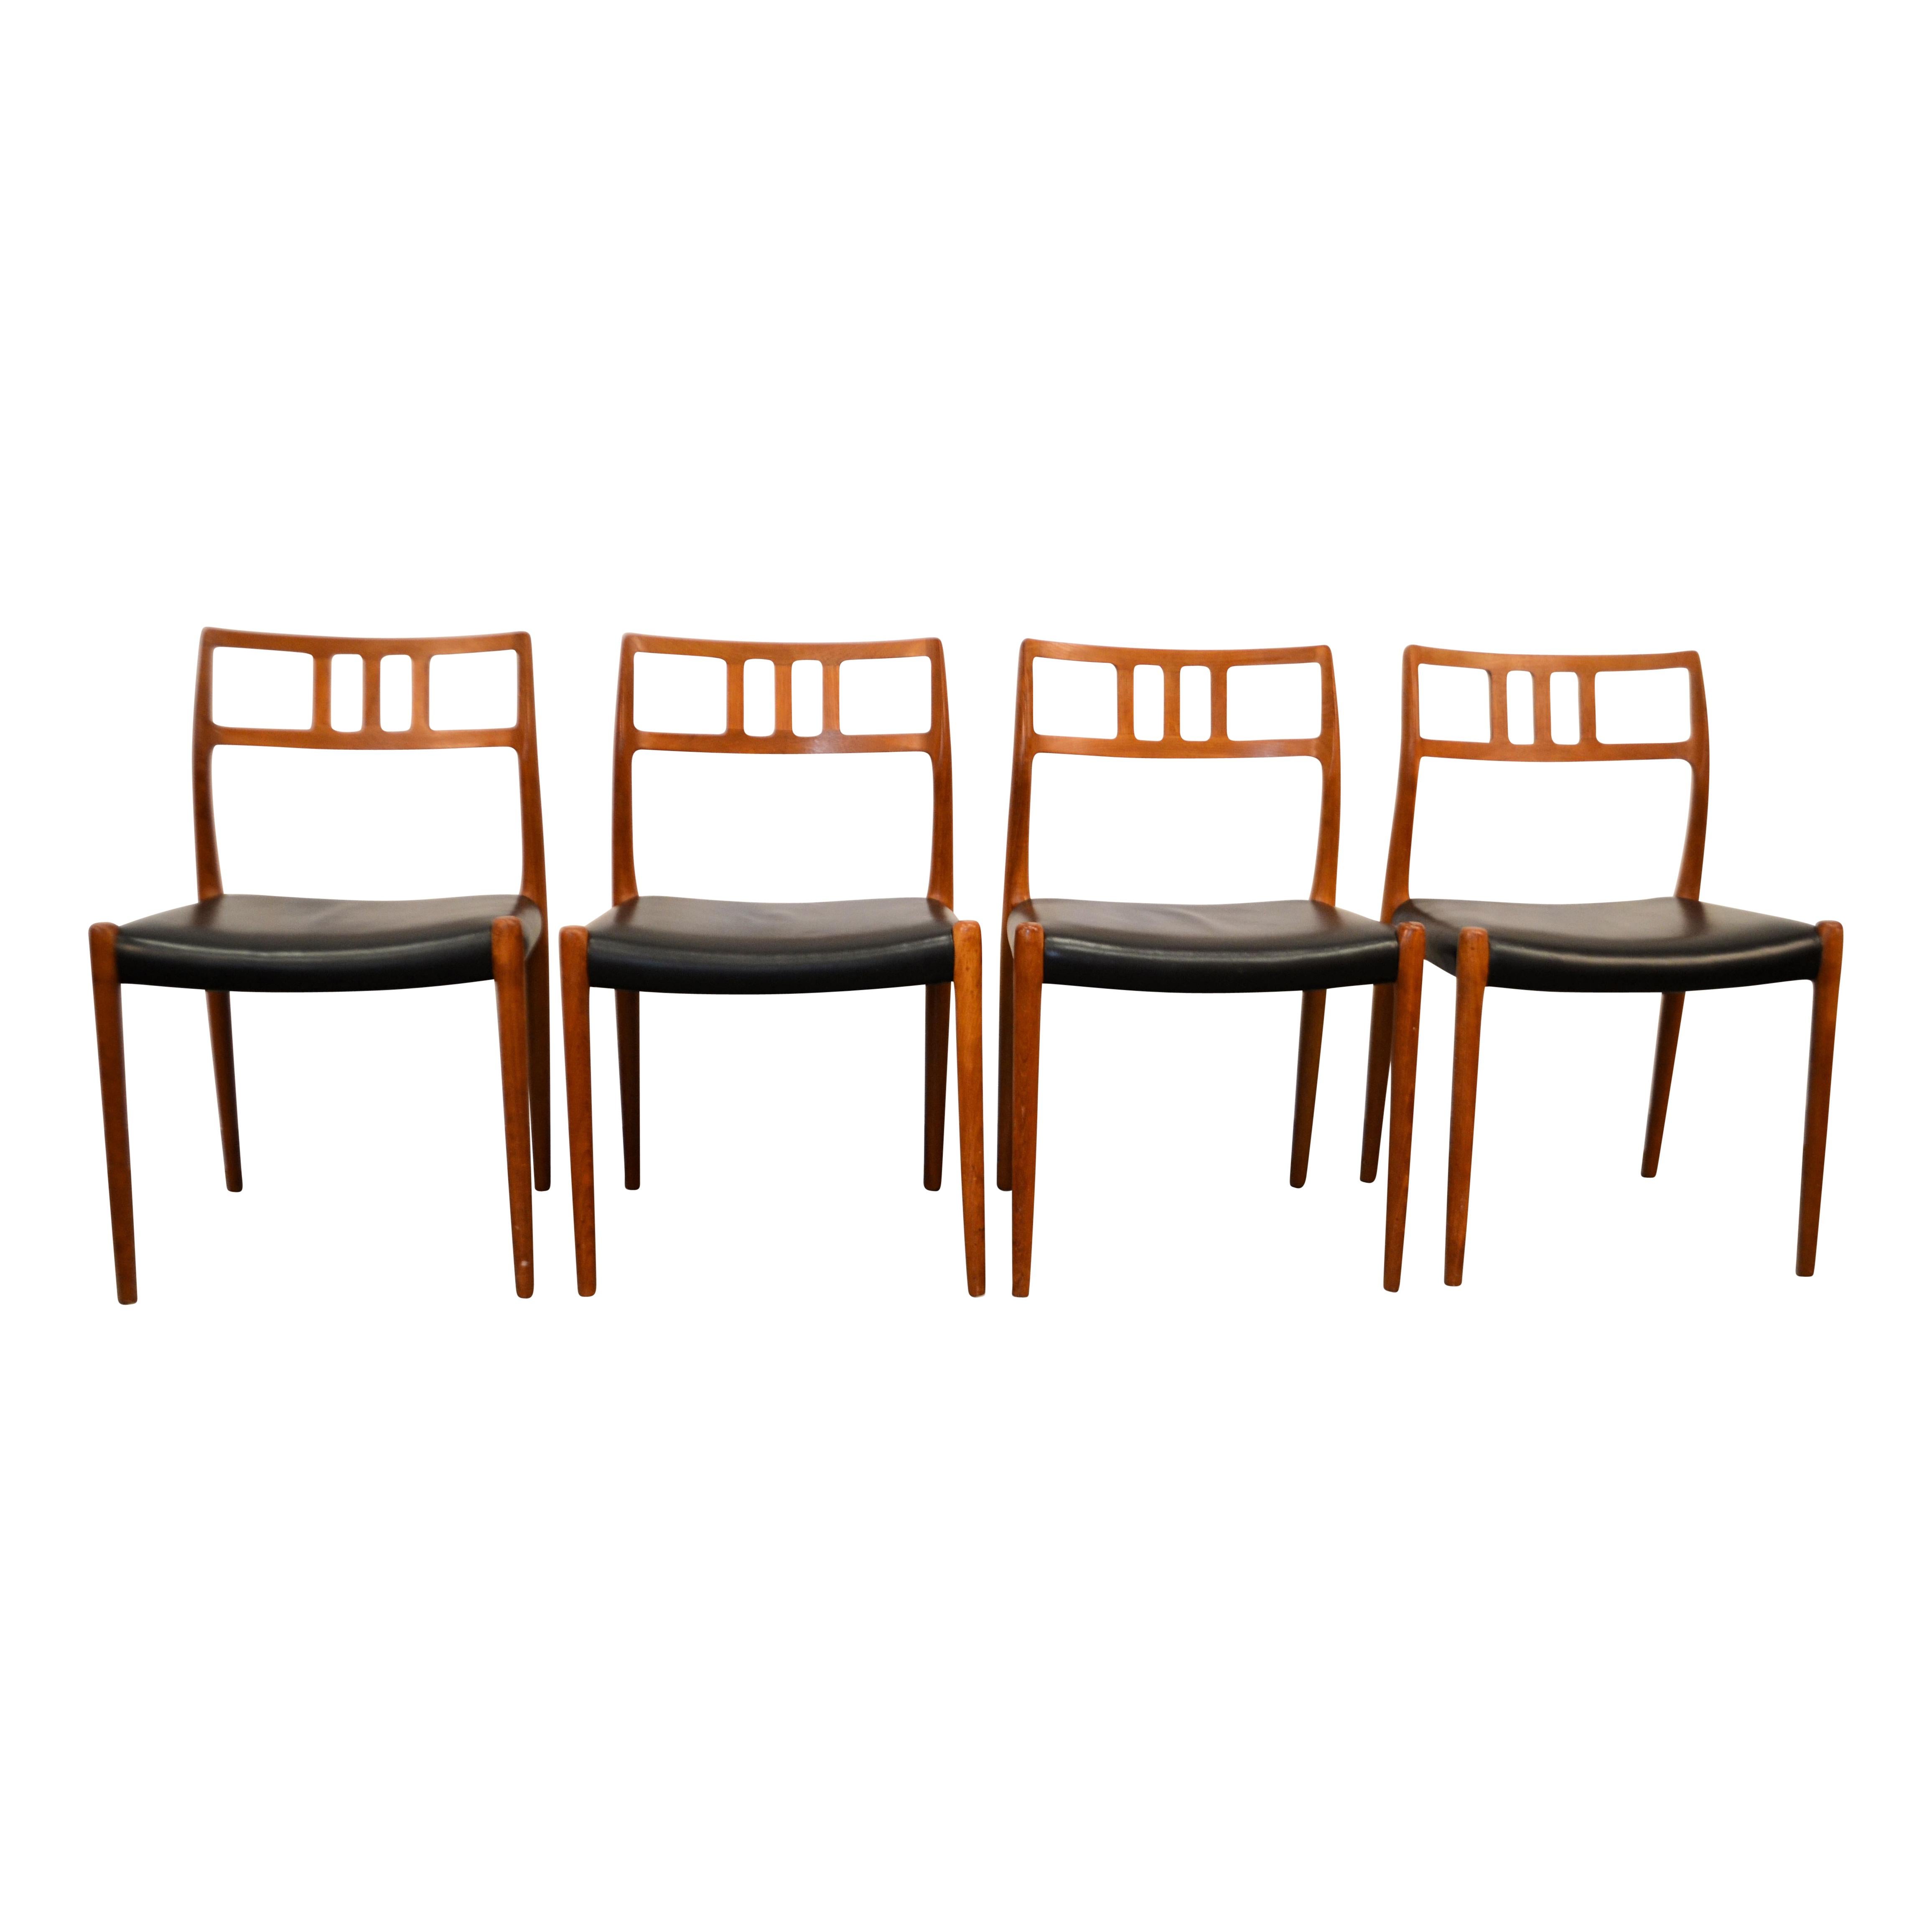 Stylish set of four vintage dining chairs. These Mid-Century Modern chairs are designed by Niels O. Møller for JL Møller Møbelfabrik in Denmark. These “no. 79” chairs feature organic design, beautiful black leather upholstery. This gorgeous set fits